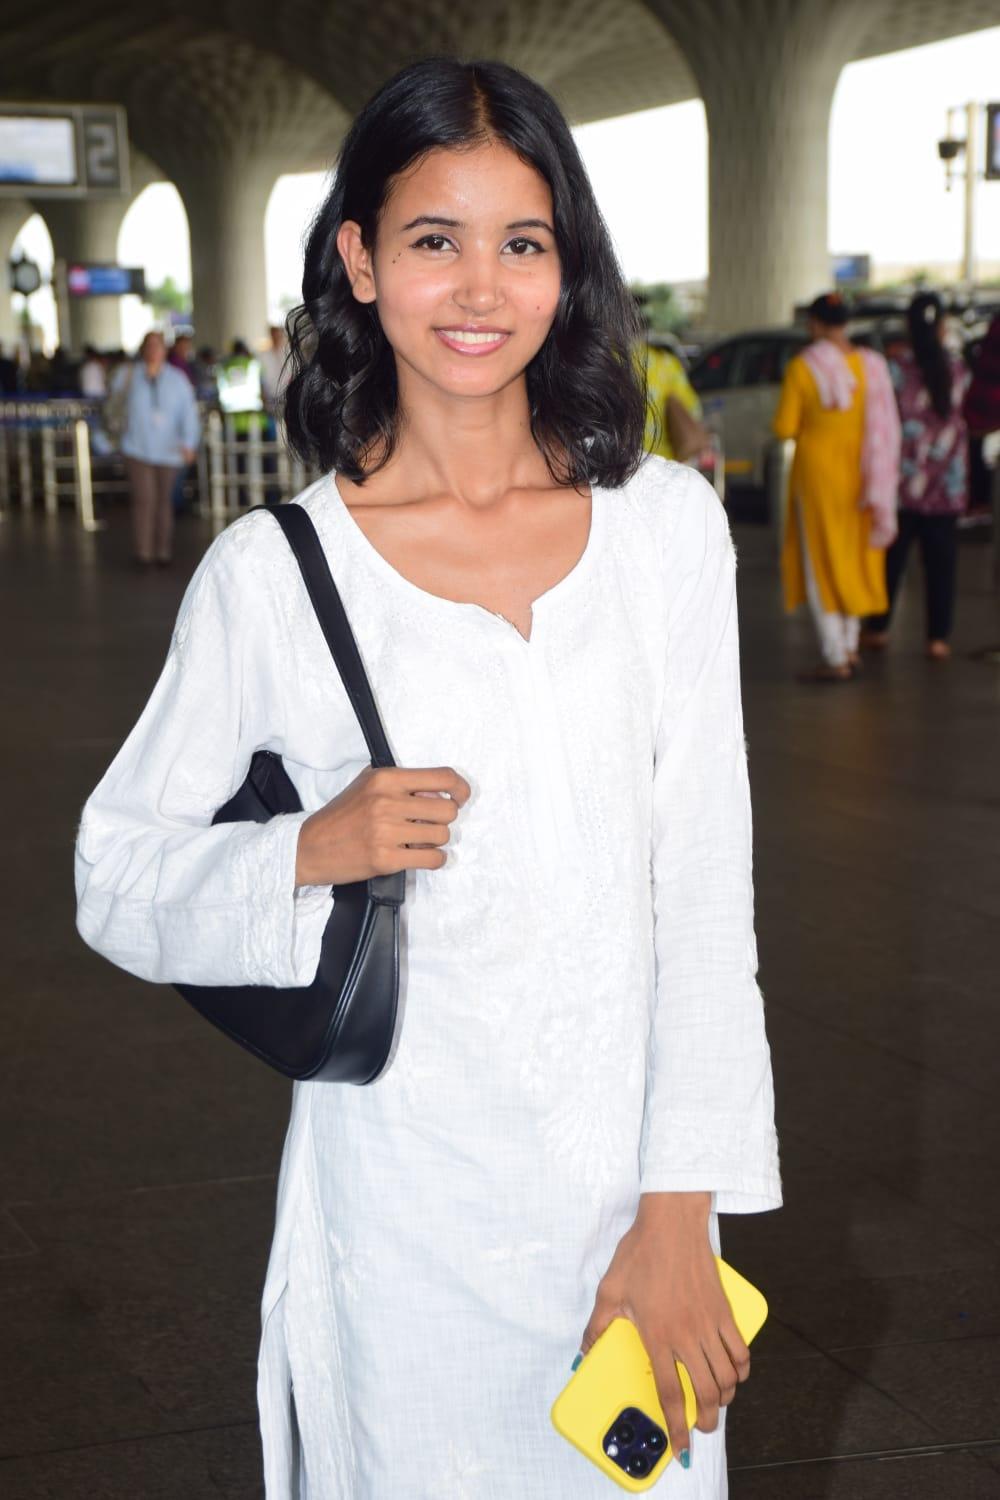 The fashion influencer wore a simple white kurta and jeans